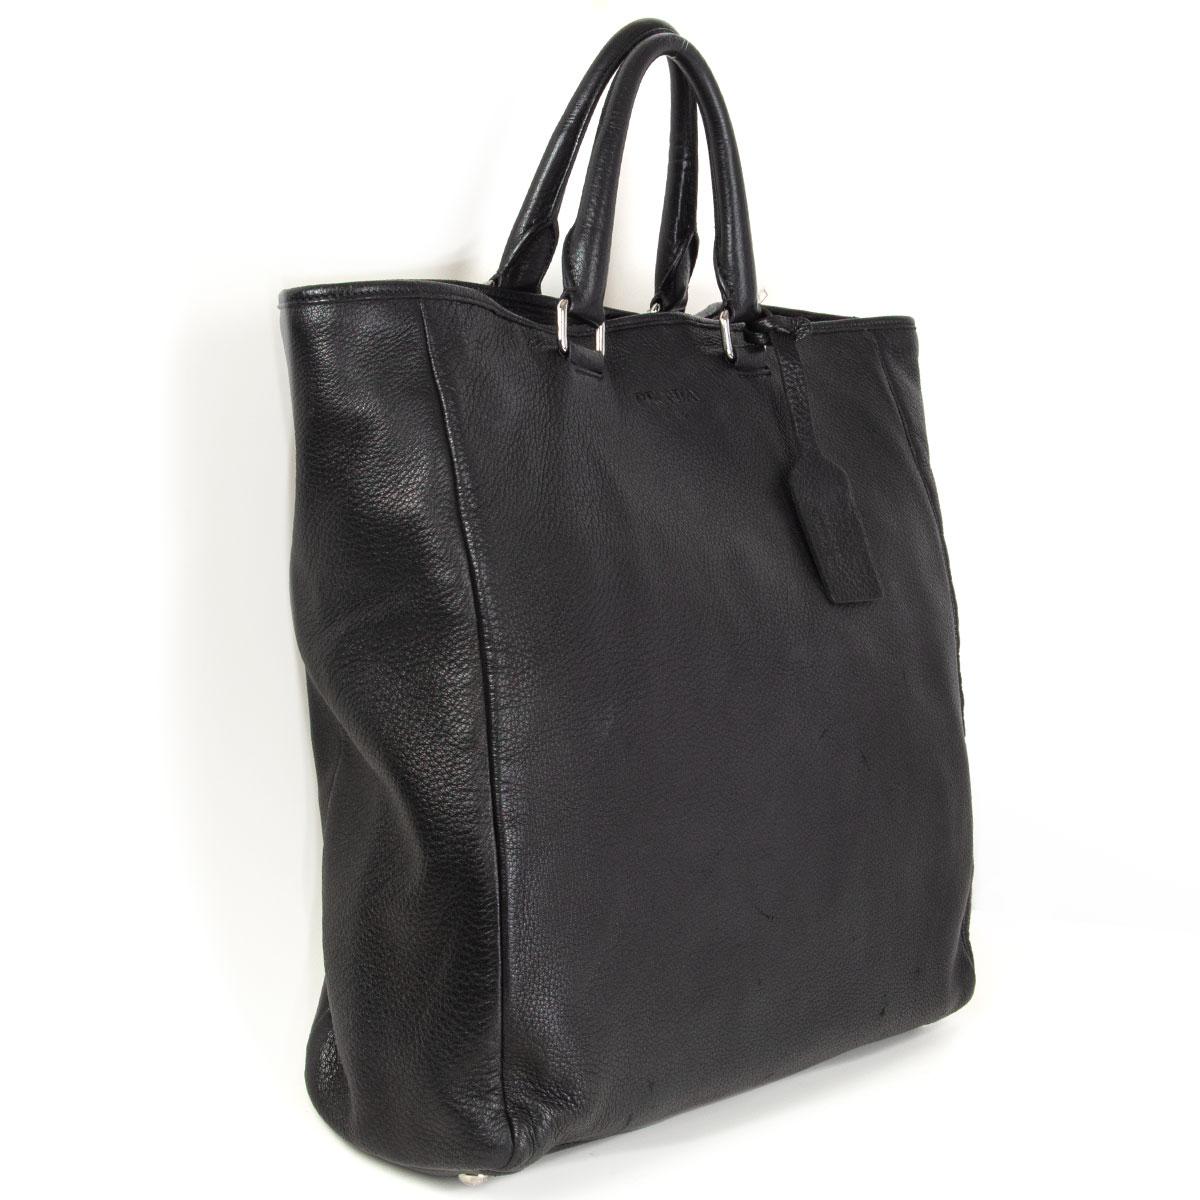 Prada large tote in black grained deerskin. Opens wth a push button and is lined in black nylon with one zipper pocket against the back and one big open pocket against the front. Has been carried with natural patina allover and some wear to the